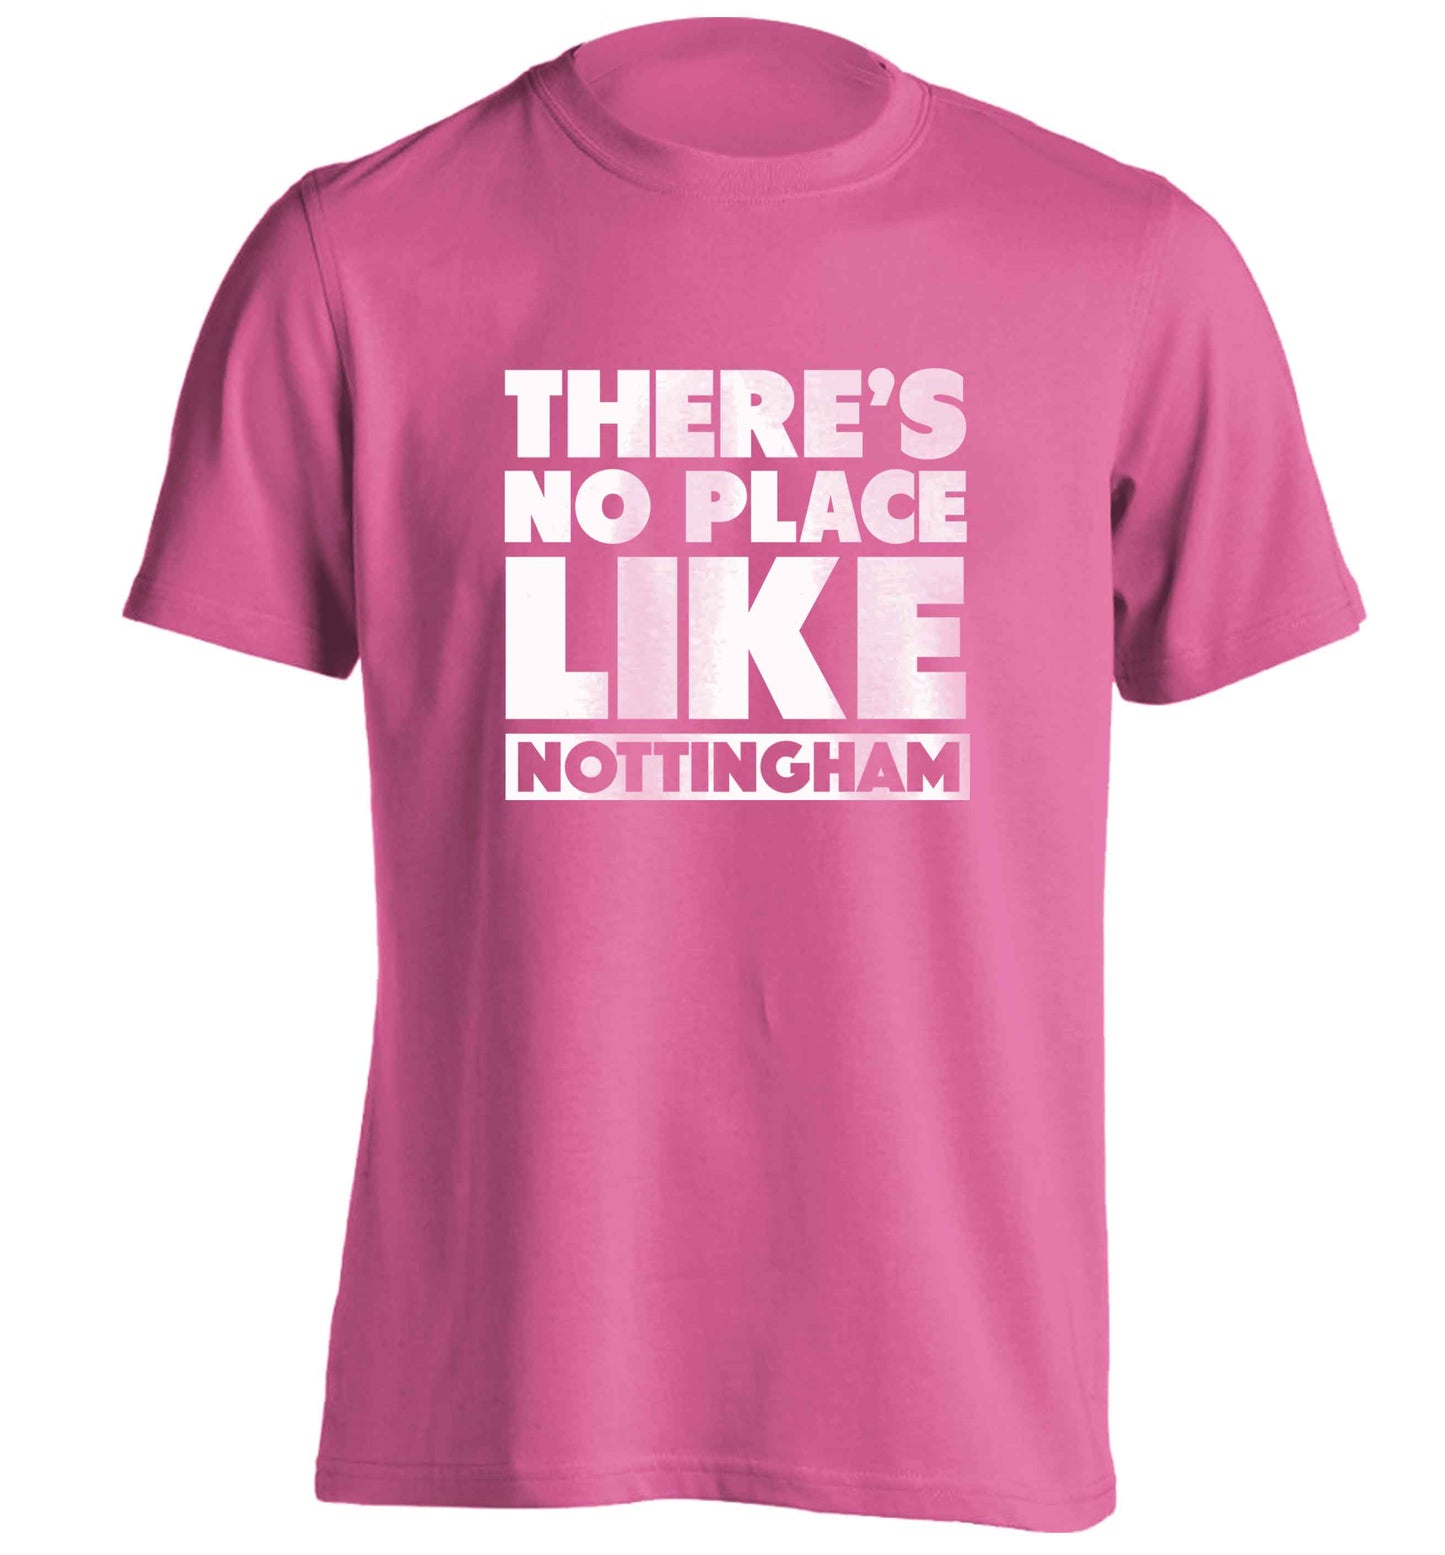 There's no place like Nottingham adults unisex pink Tshirt 2XL